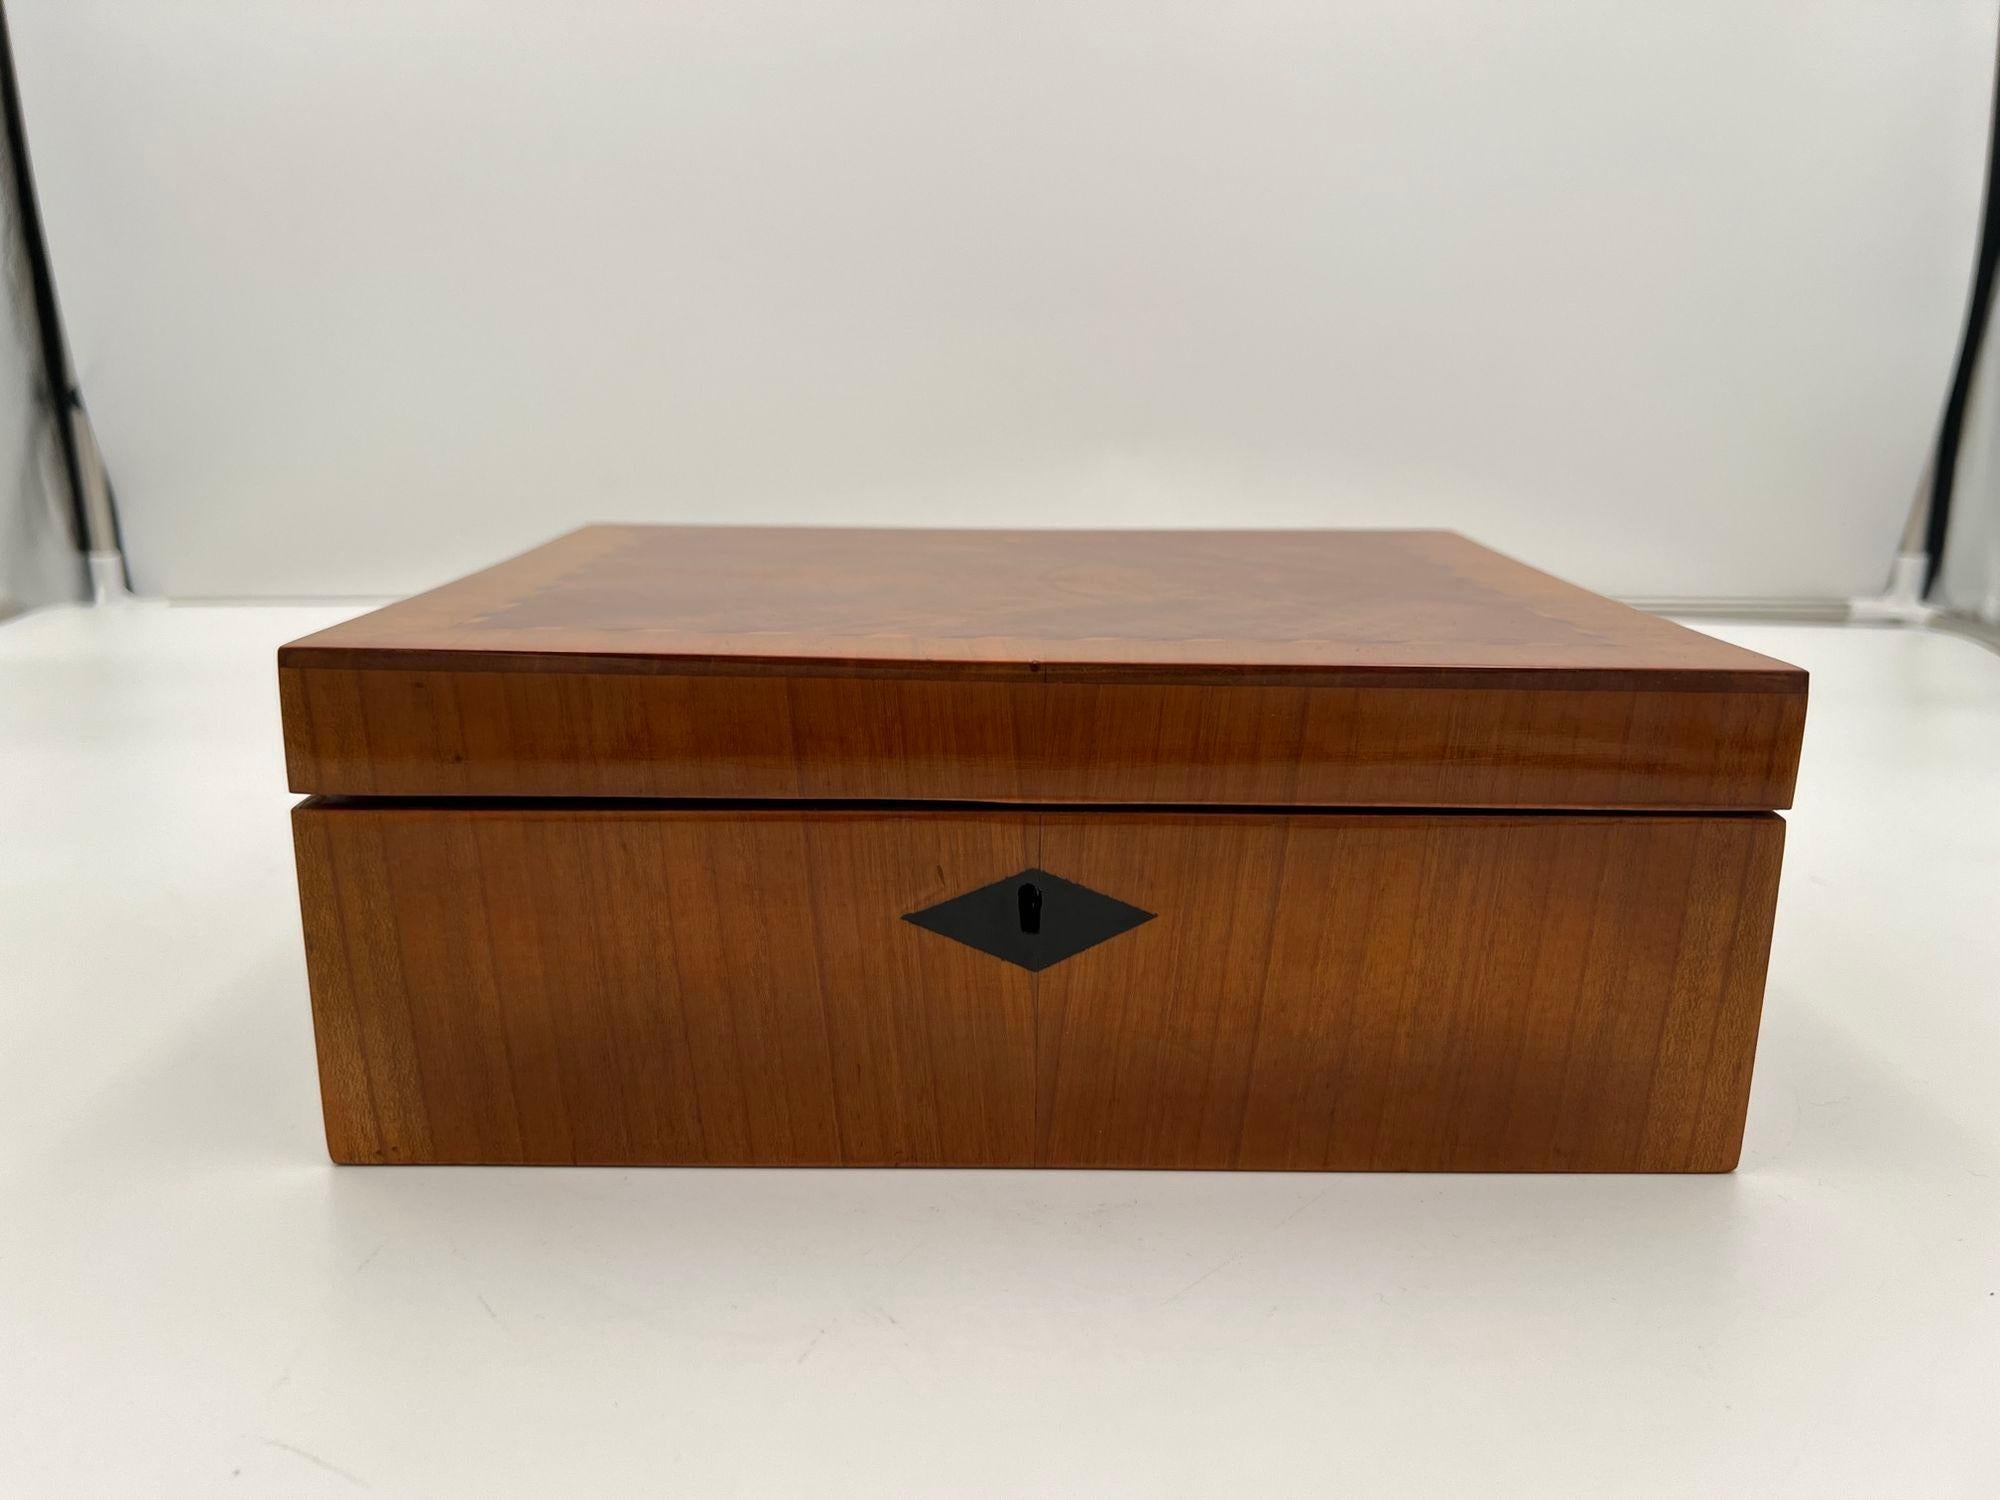 Gorgeous antique Biedermeier Box, Cherry Wood with Inlays, Austria circa 1820.
Cherrywood veneered. Inlays in maple, pearwood and walnut on the top lid.
Inside with mirror and 1 drawer. Ebonized key crest.
Restored and hand polished with